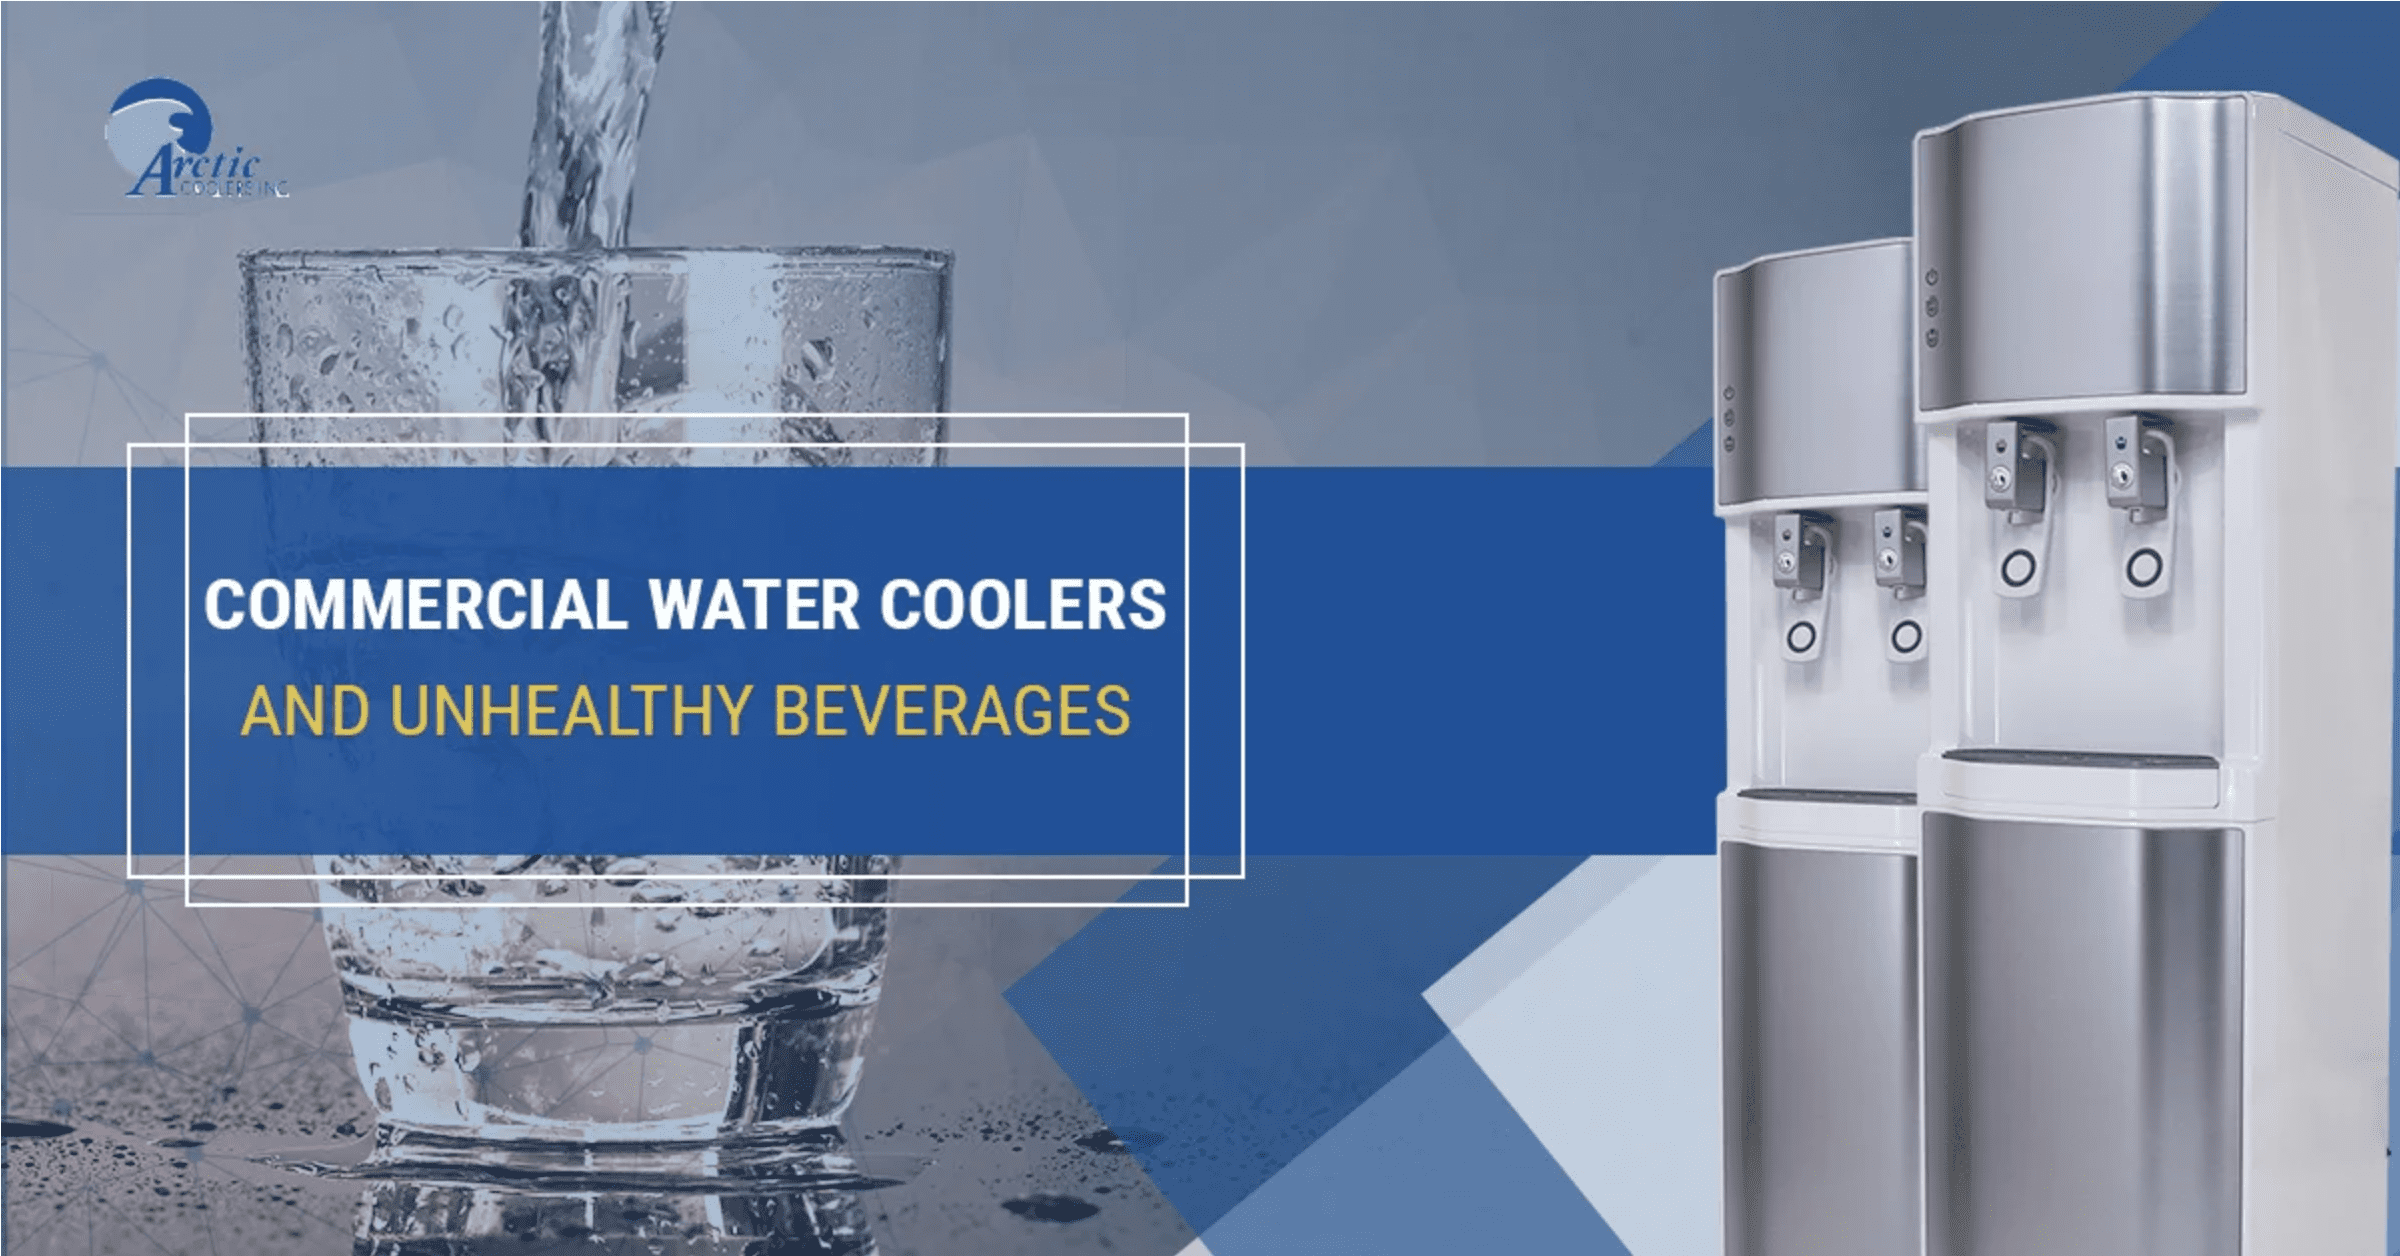 Commercial water coolers and unhealthy beverages